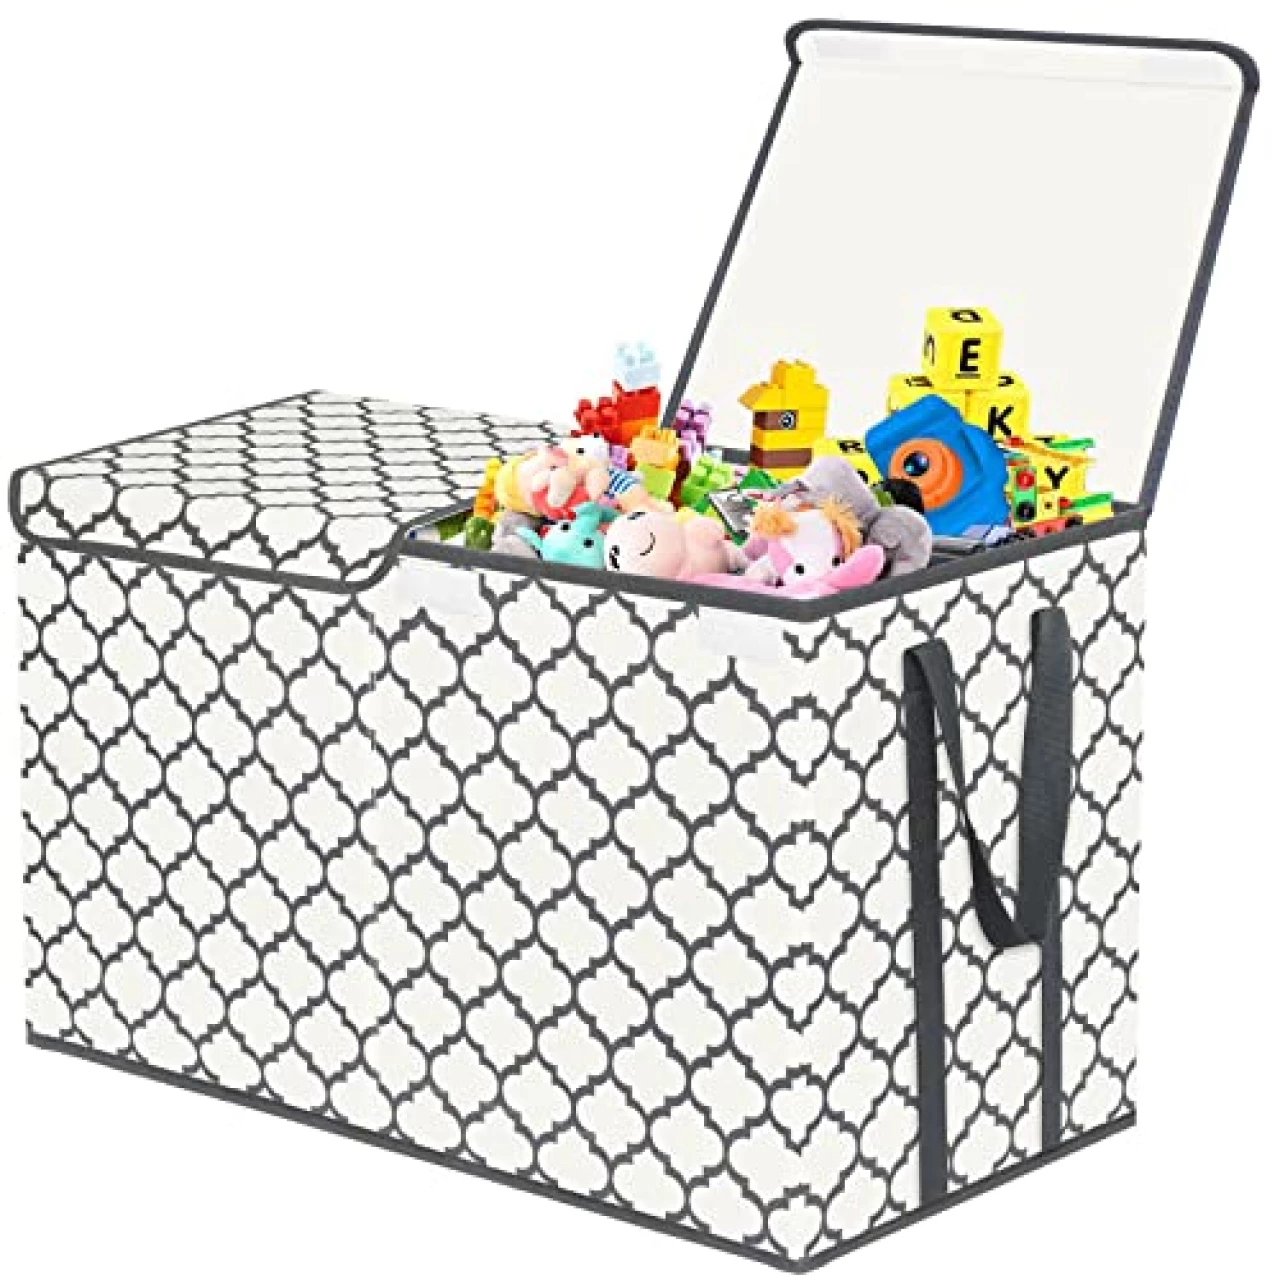 Toy Box for Boys,Girls,Kids - Large Toy Chest Organizers and Storage Boxes with Double Flip-Top Lid, Collapsible Container Bins for Playroom, Nursery, Closet, Living Room, 24.5&quot;x13&quot;x16&quot; (Beige)